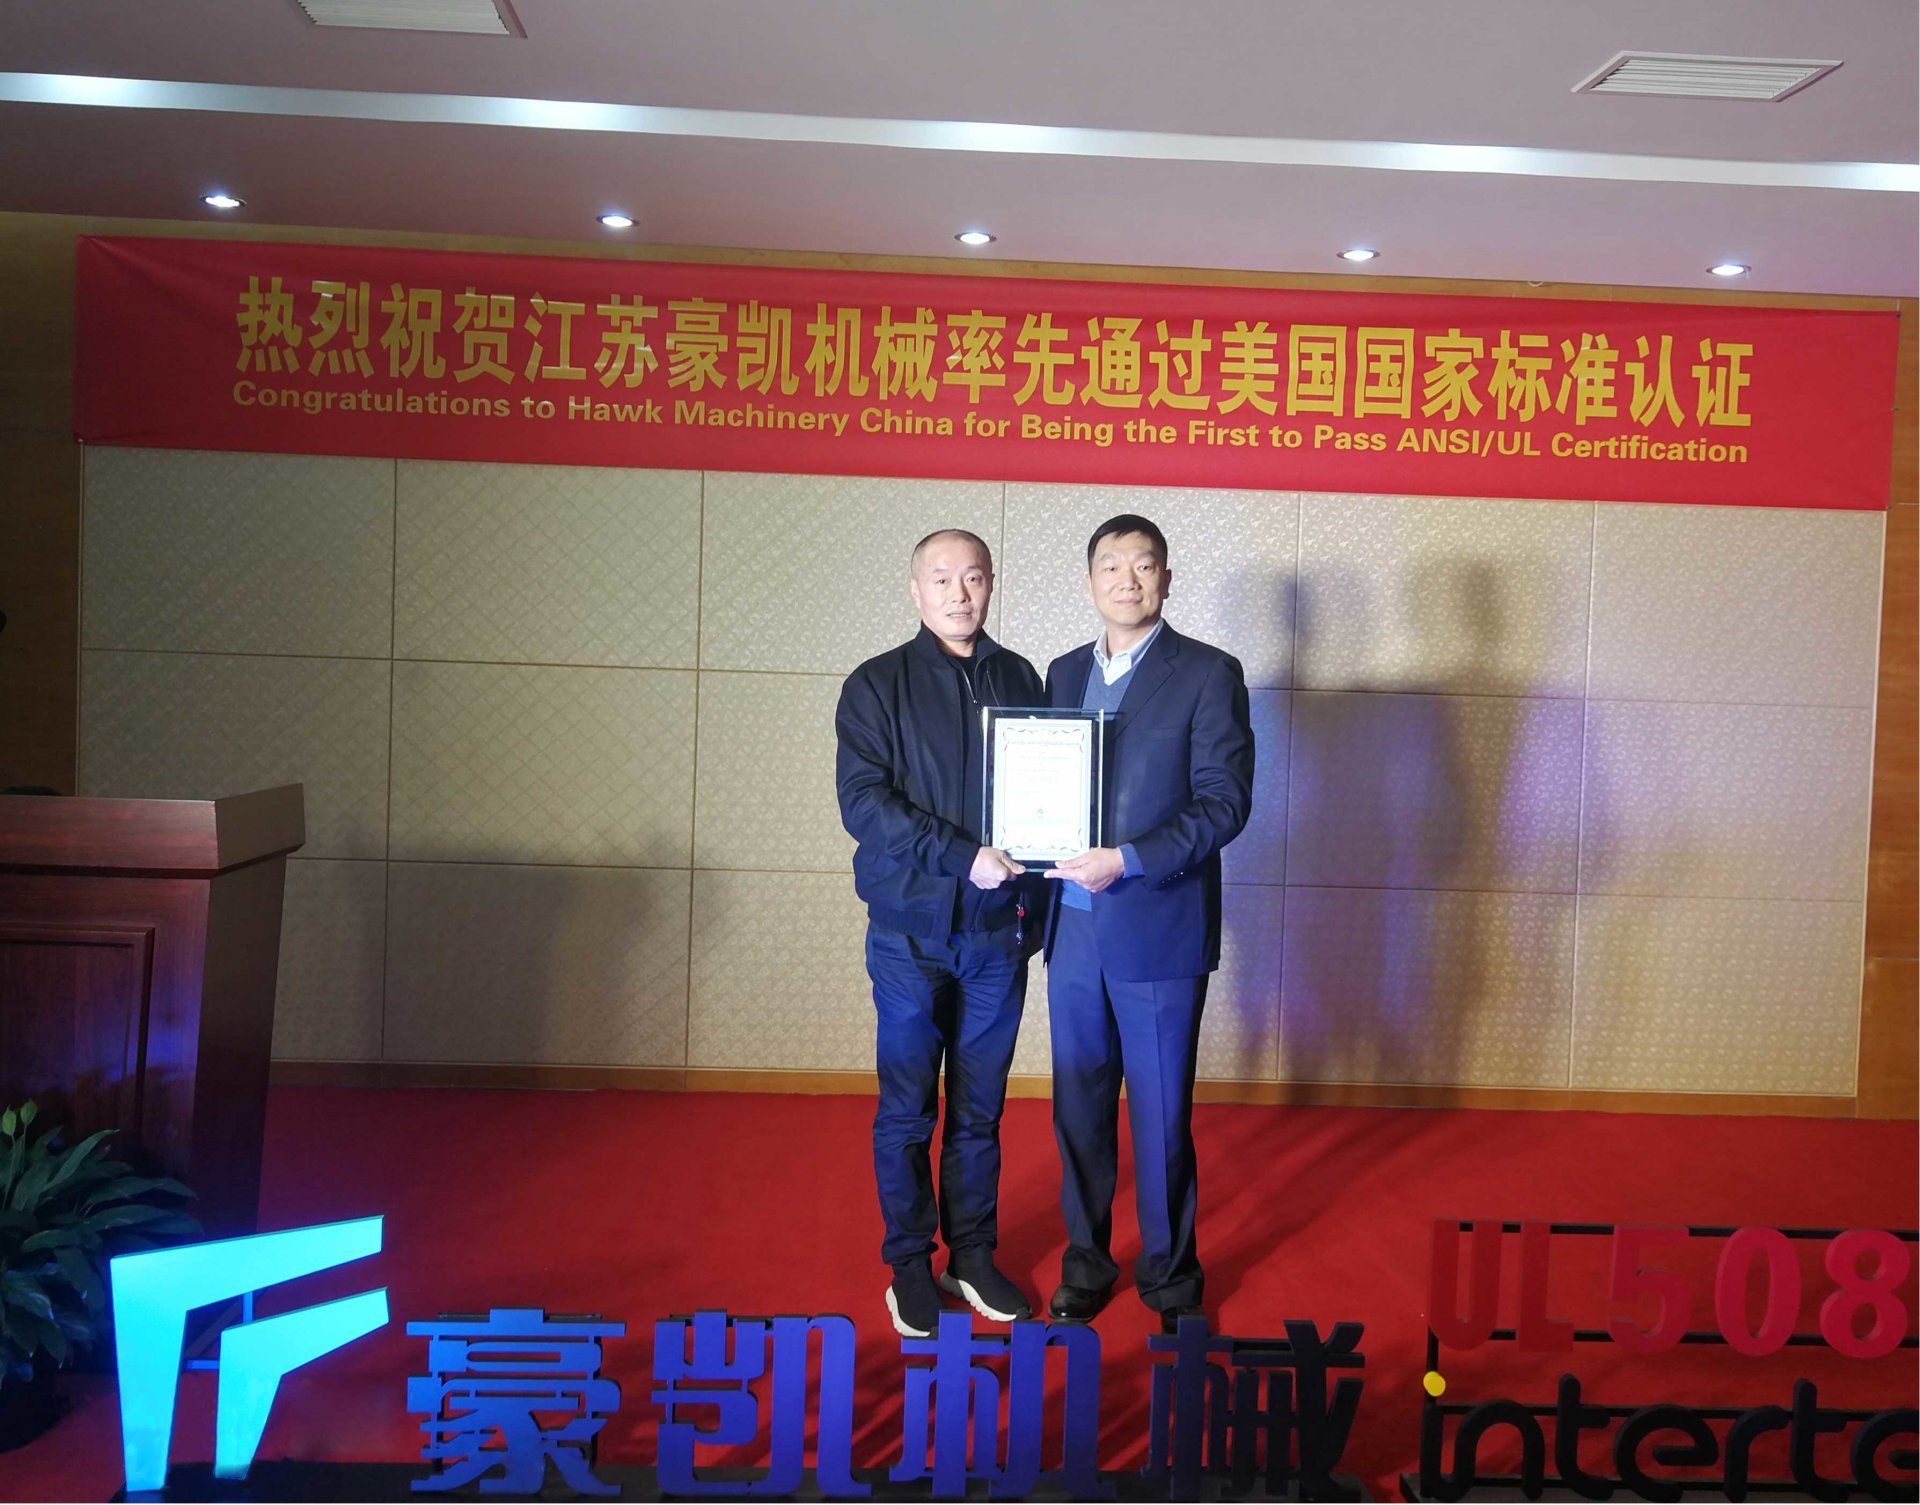 Haokai Machinery products obtained the first Intertek ETL certification